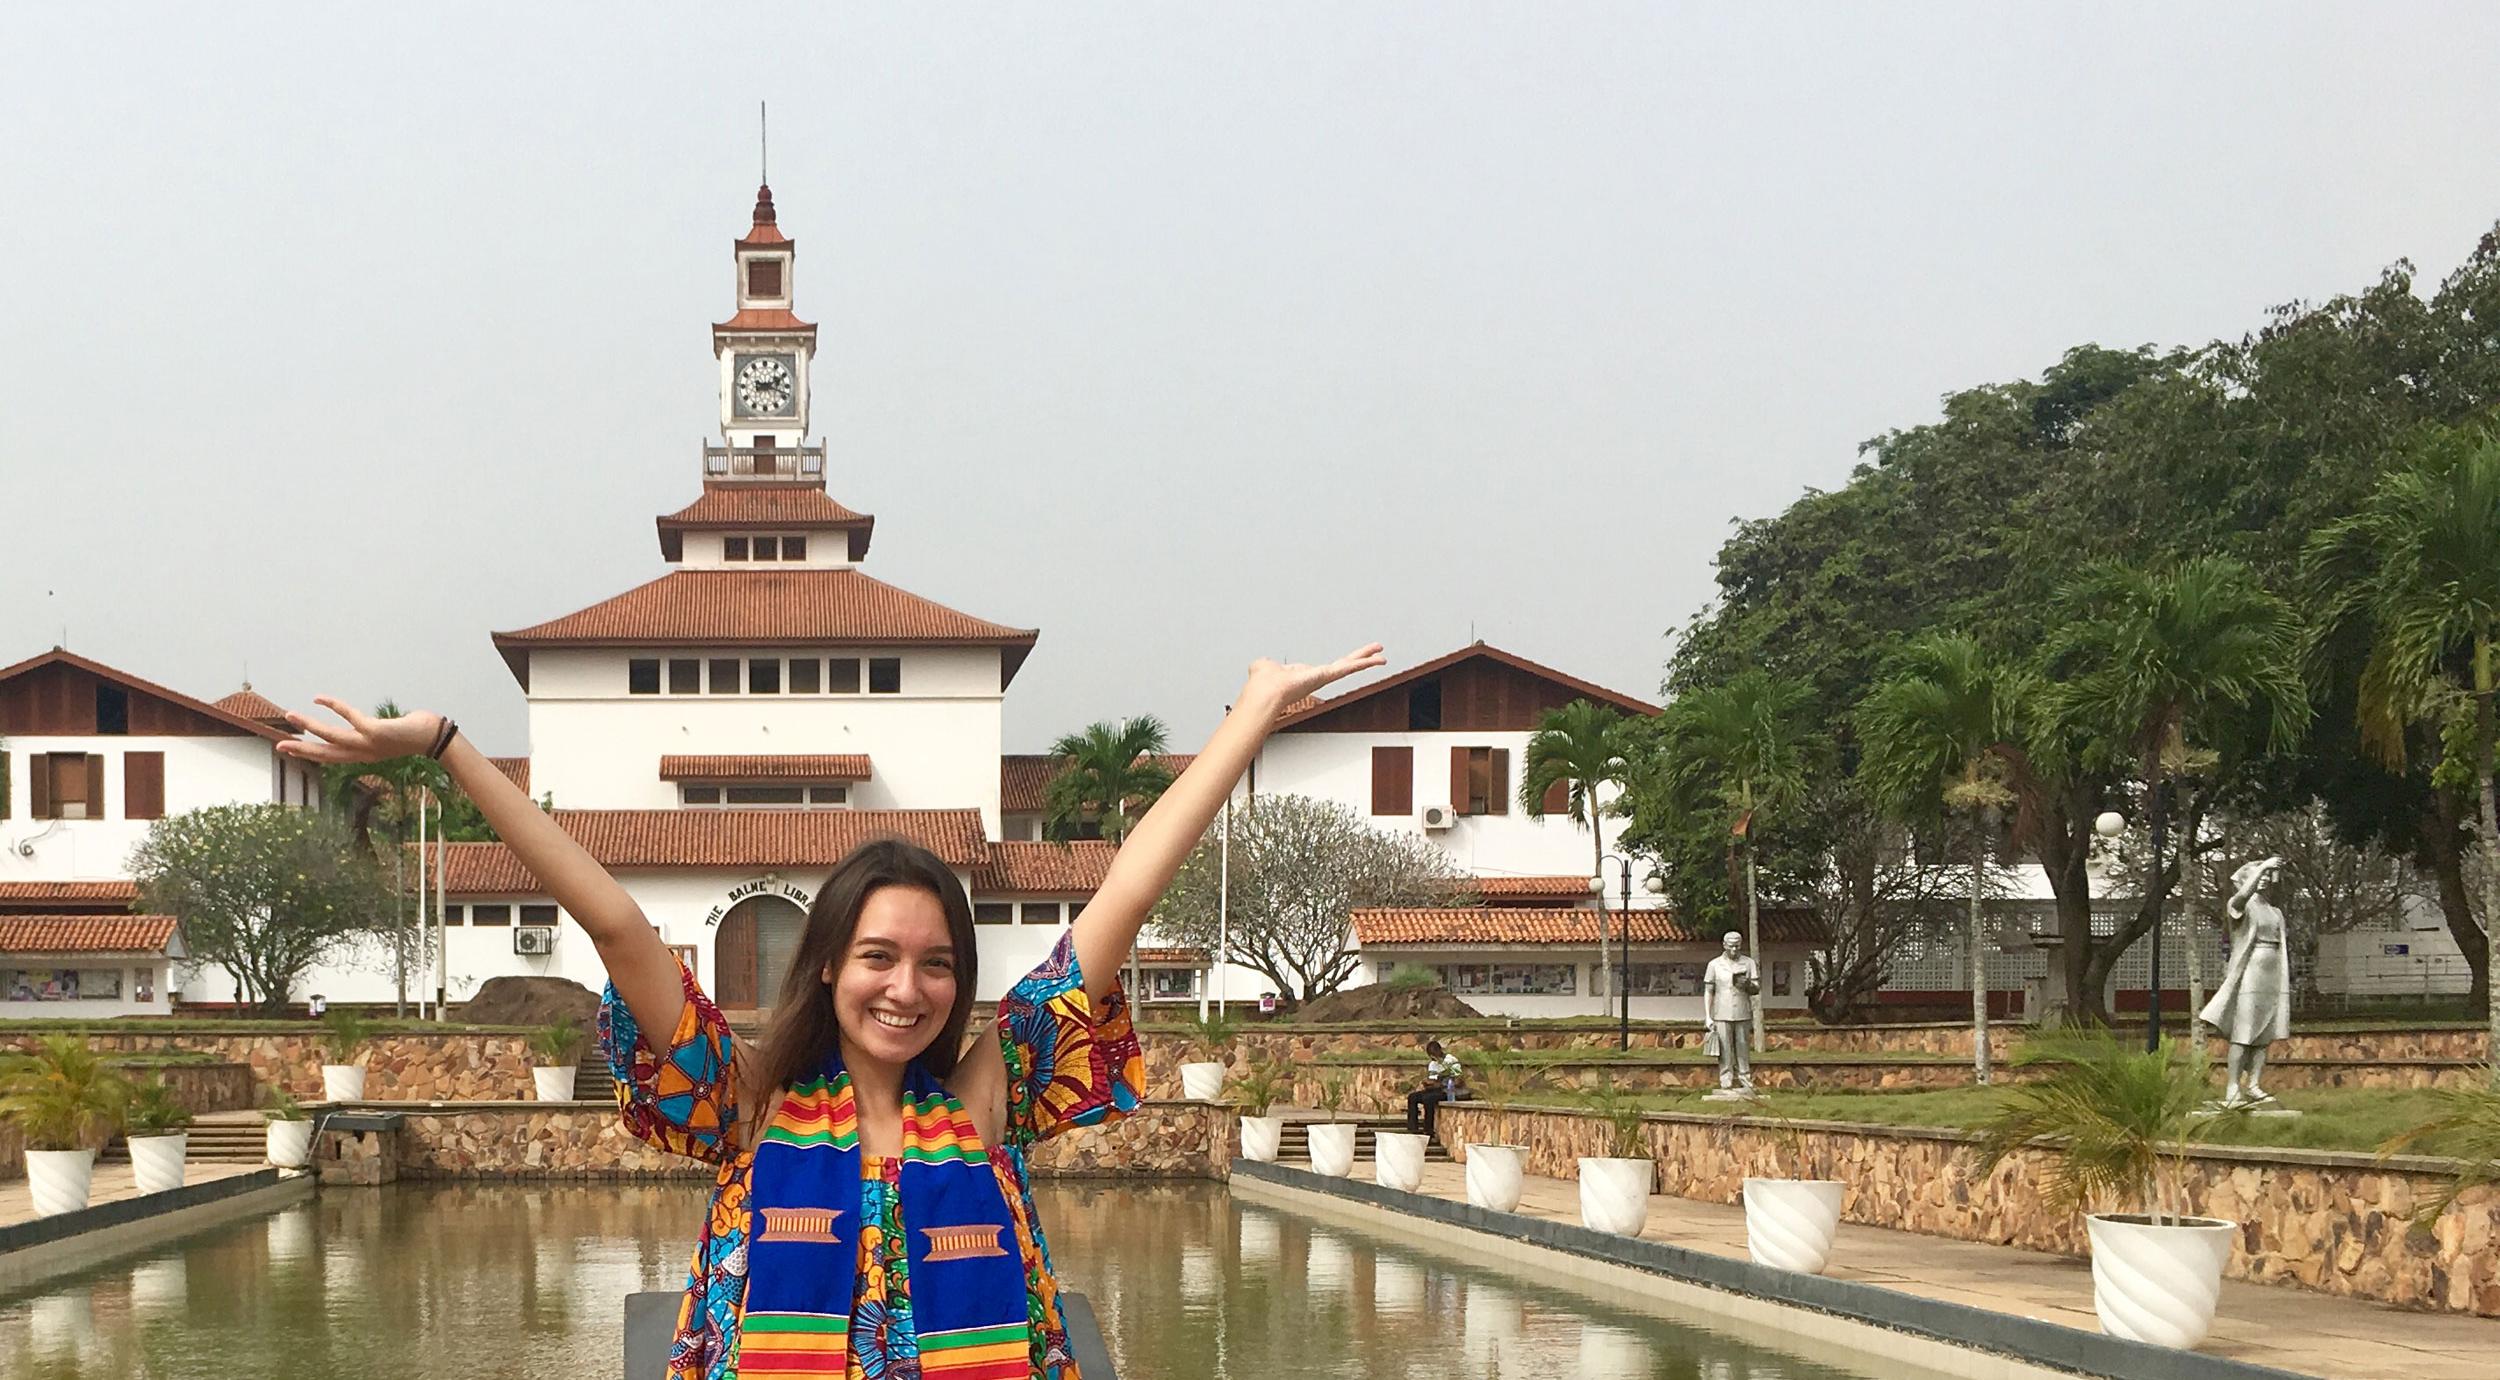 UCEAP student smiling with her arms in the air in Ghana, Africa